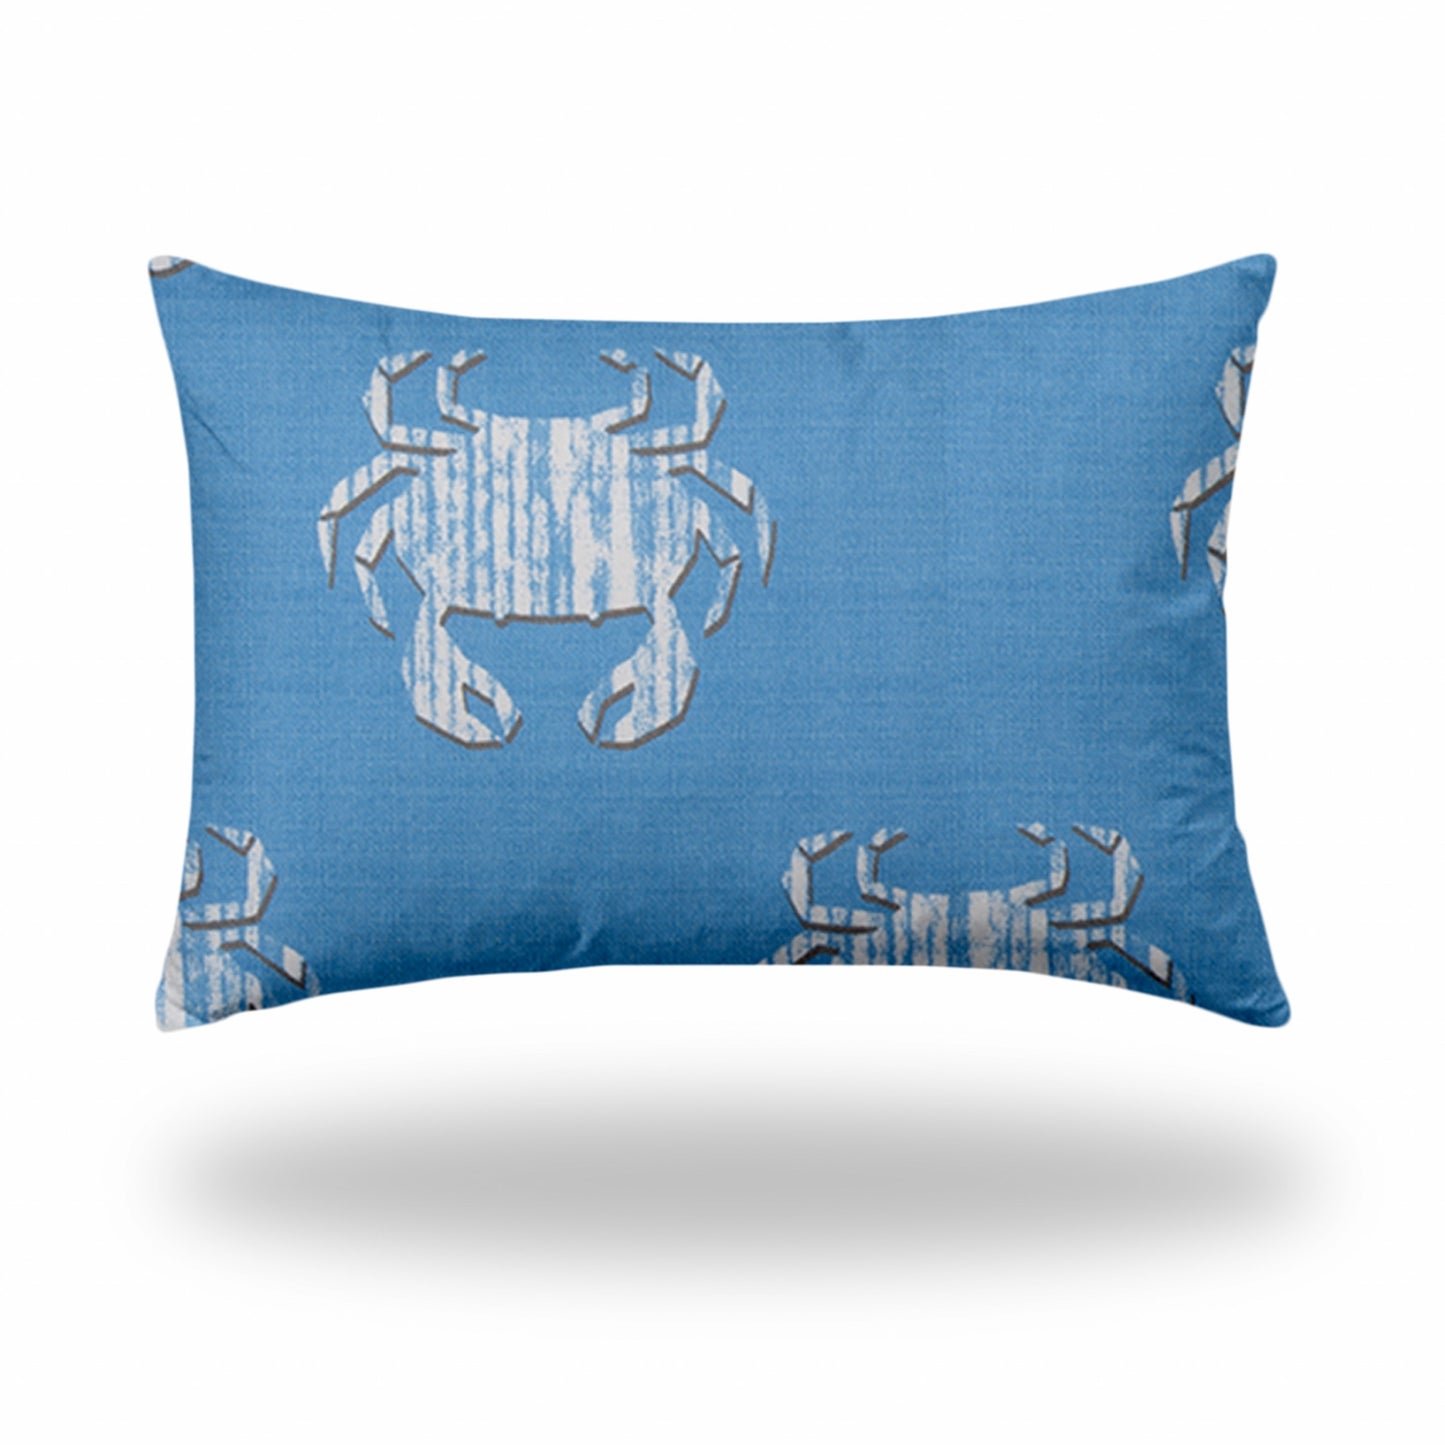 12" X 18" Blue And White Crab Zippered Lumbar Indoor Outdoor Pillow Cover